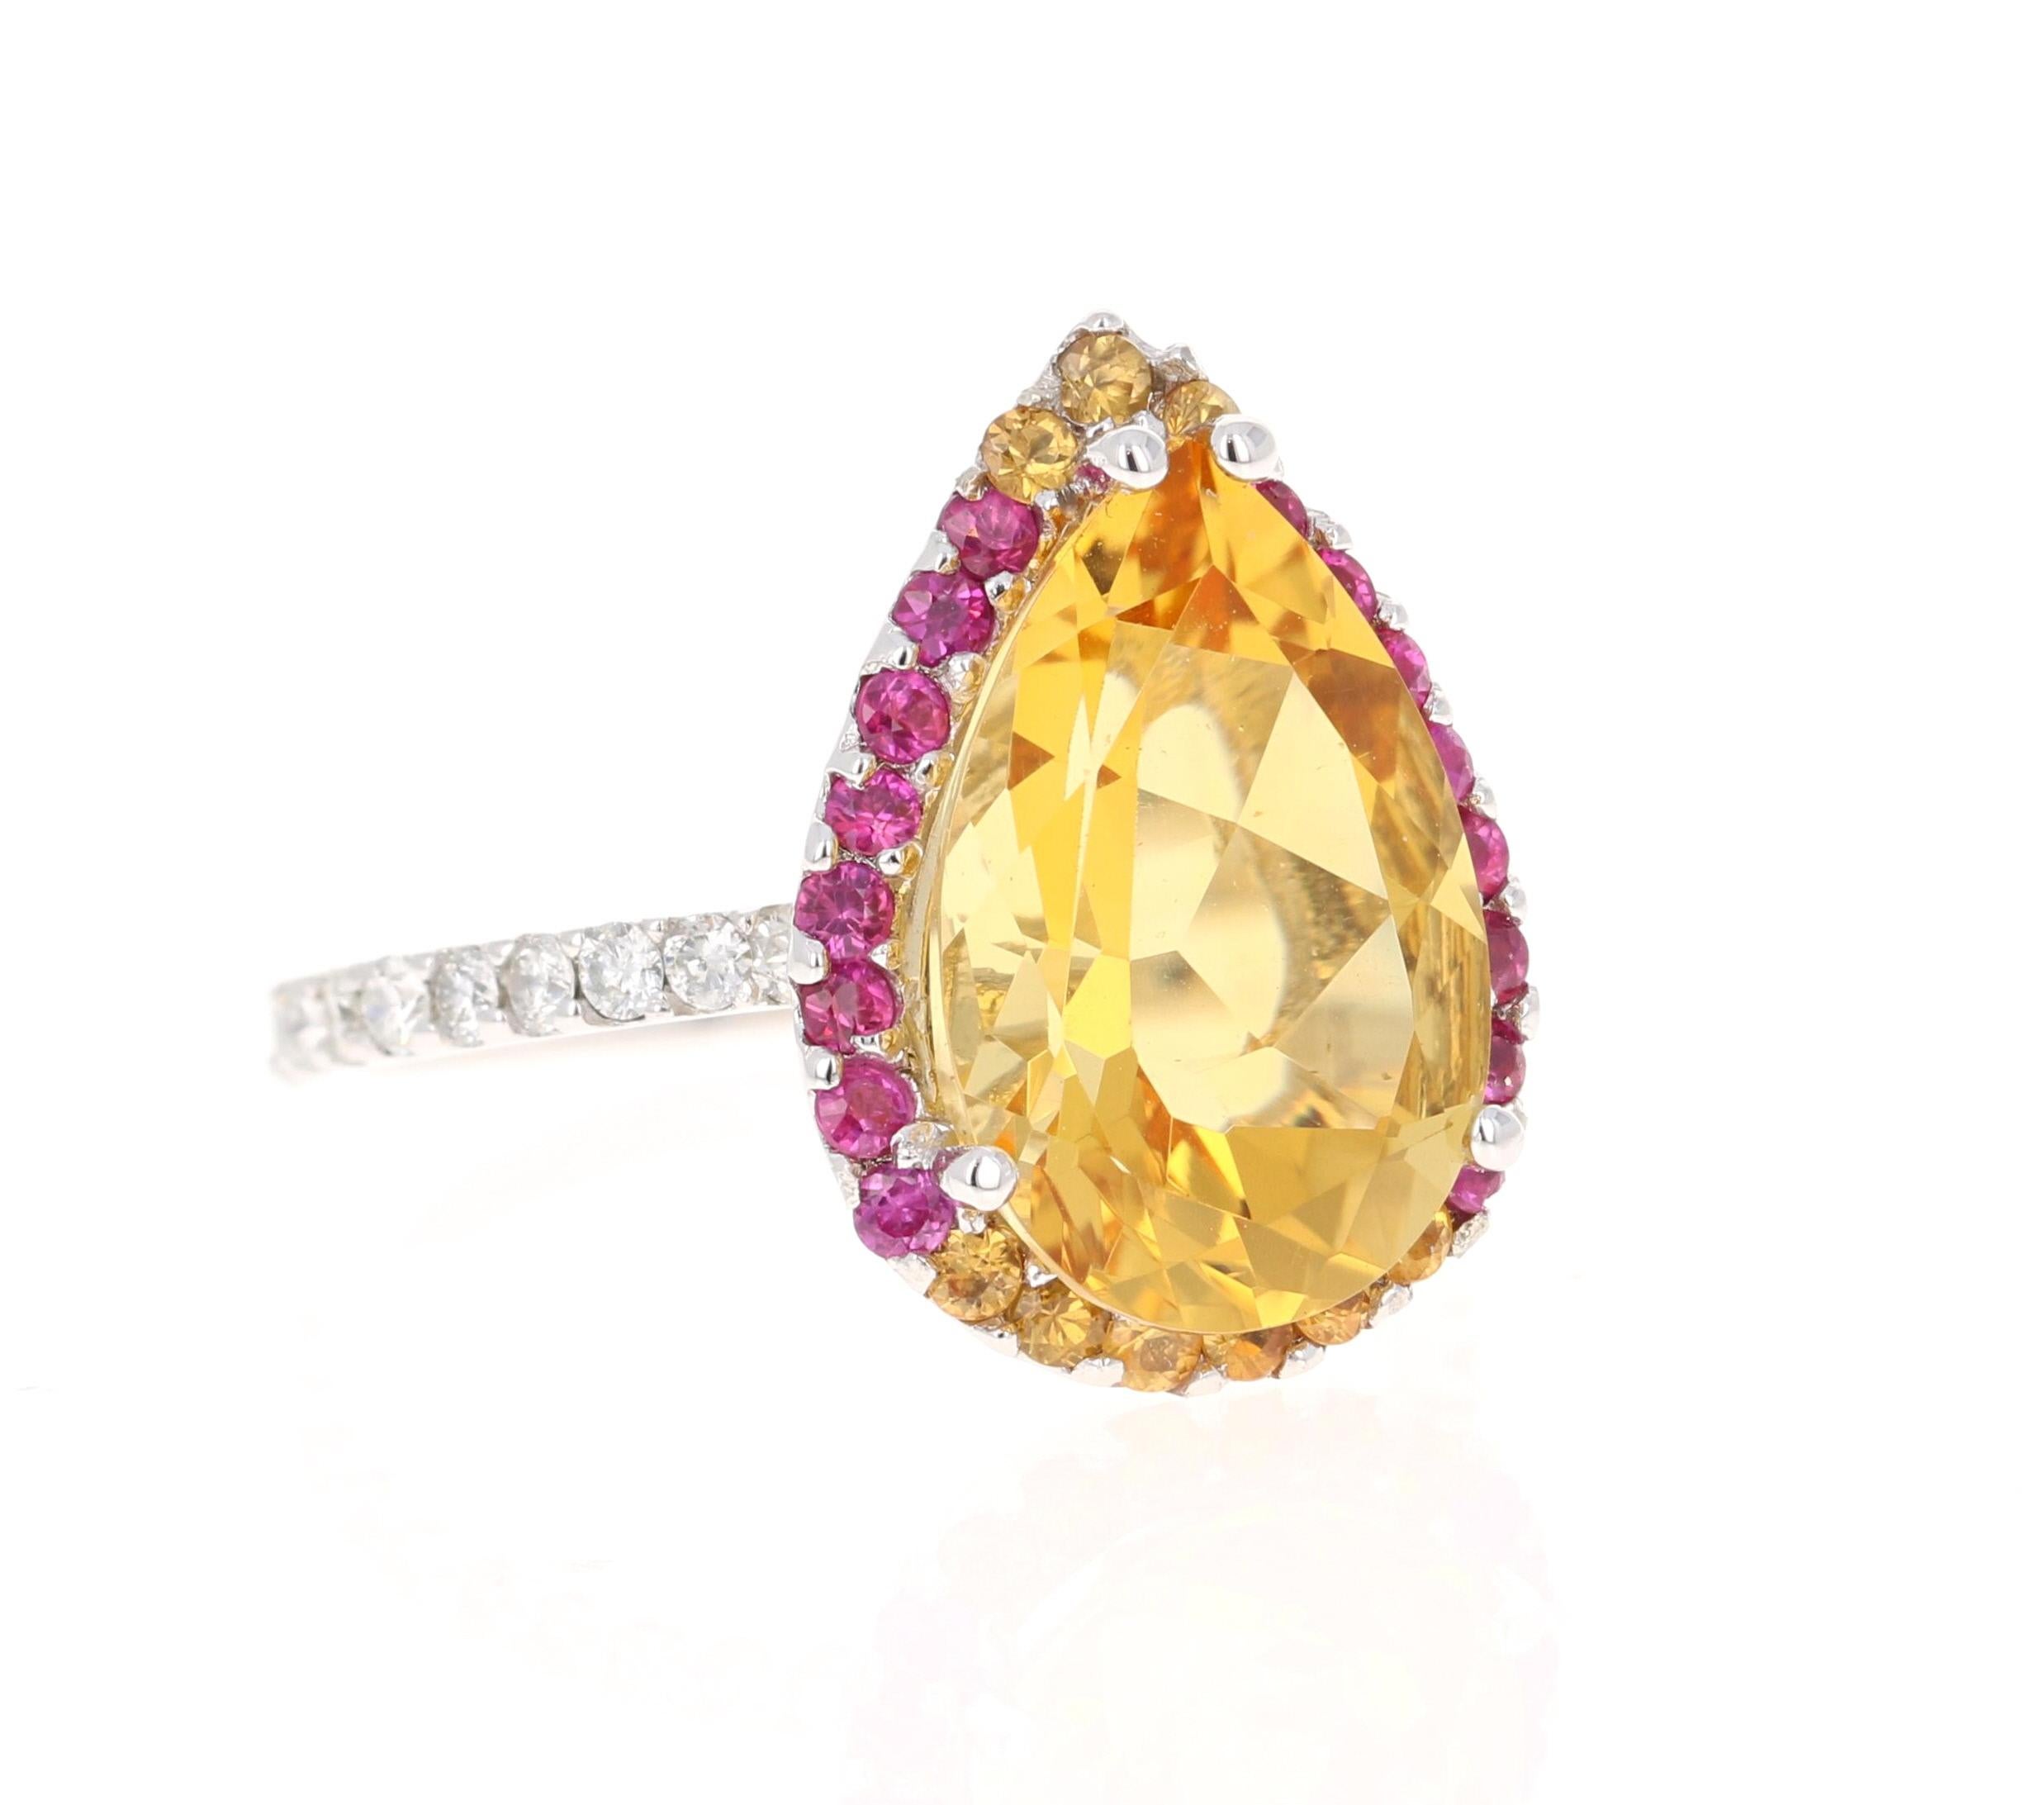 Pear Cut 6.25 Carat Citrine Pink Sapphire Diamond White Gold Cocktail Ring For Sale